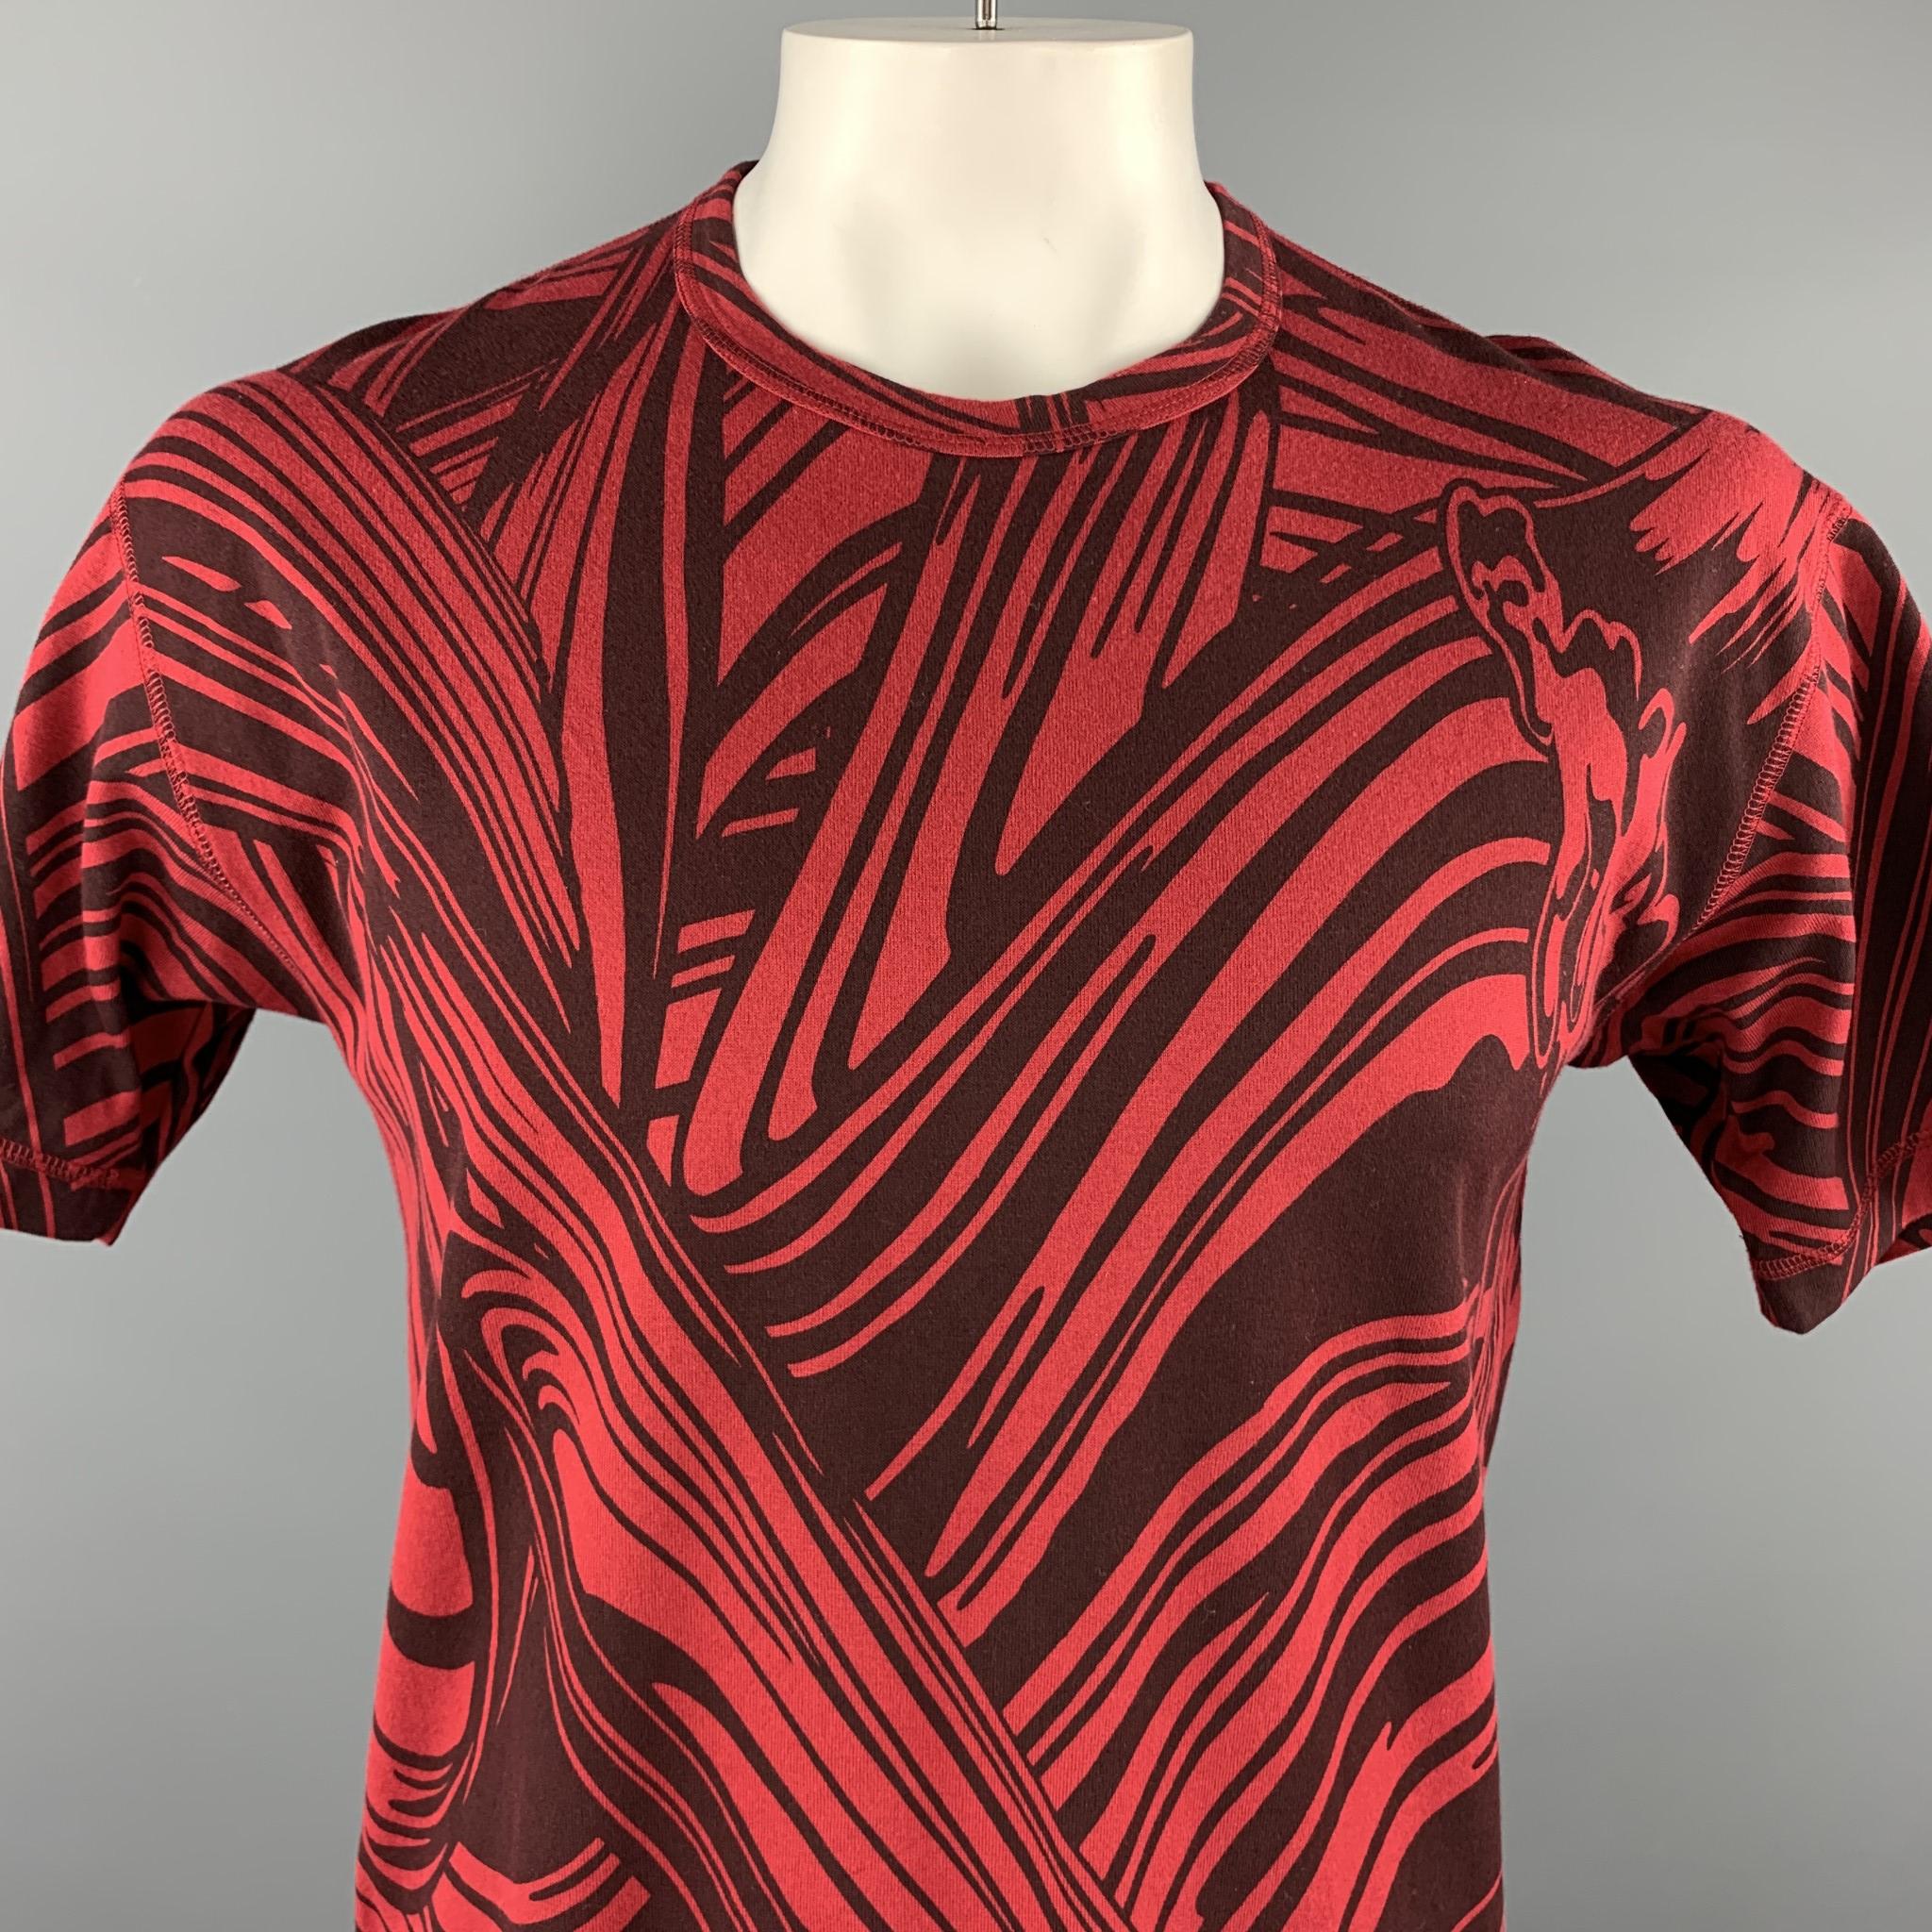 ISSEY MIYAKE MEN T shirt comes in red cotton jersey with an all over abstract burgundy brush stroke print. Tags removed. As-is.

Very Good Pre-Owned Condition.
Marked: (no size)

Measurements:

Shoulder: 21 in.
Chest: 44 in.
Sleeve: 9 in.
Length: 27